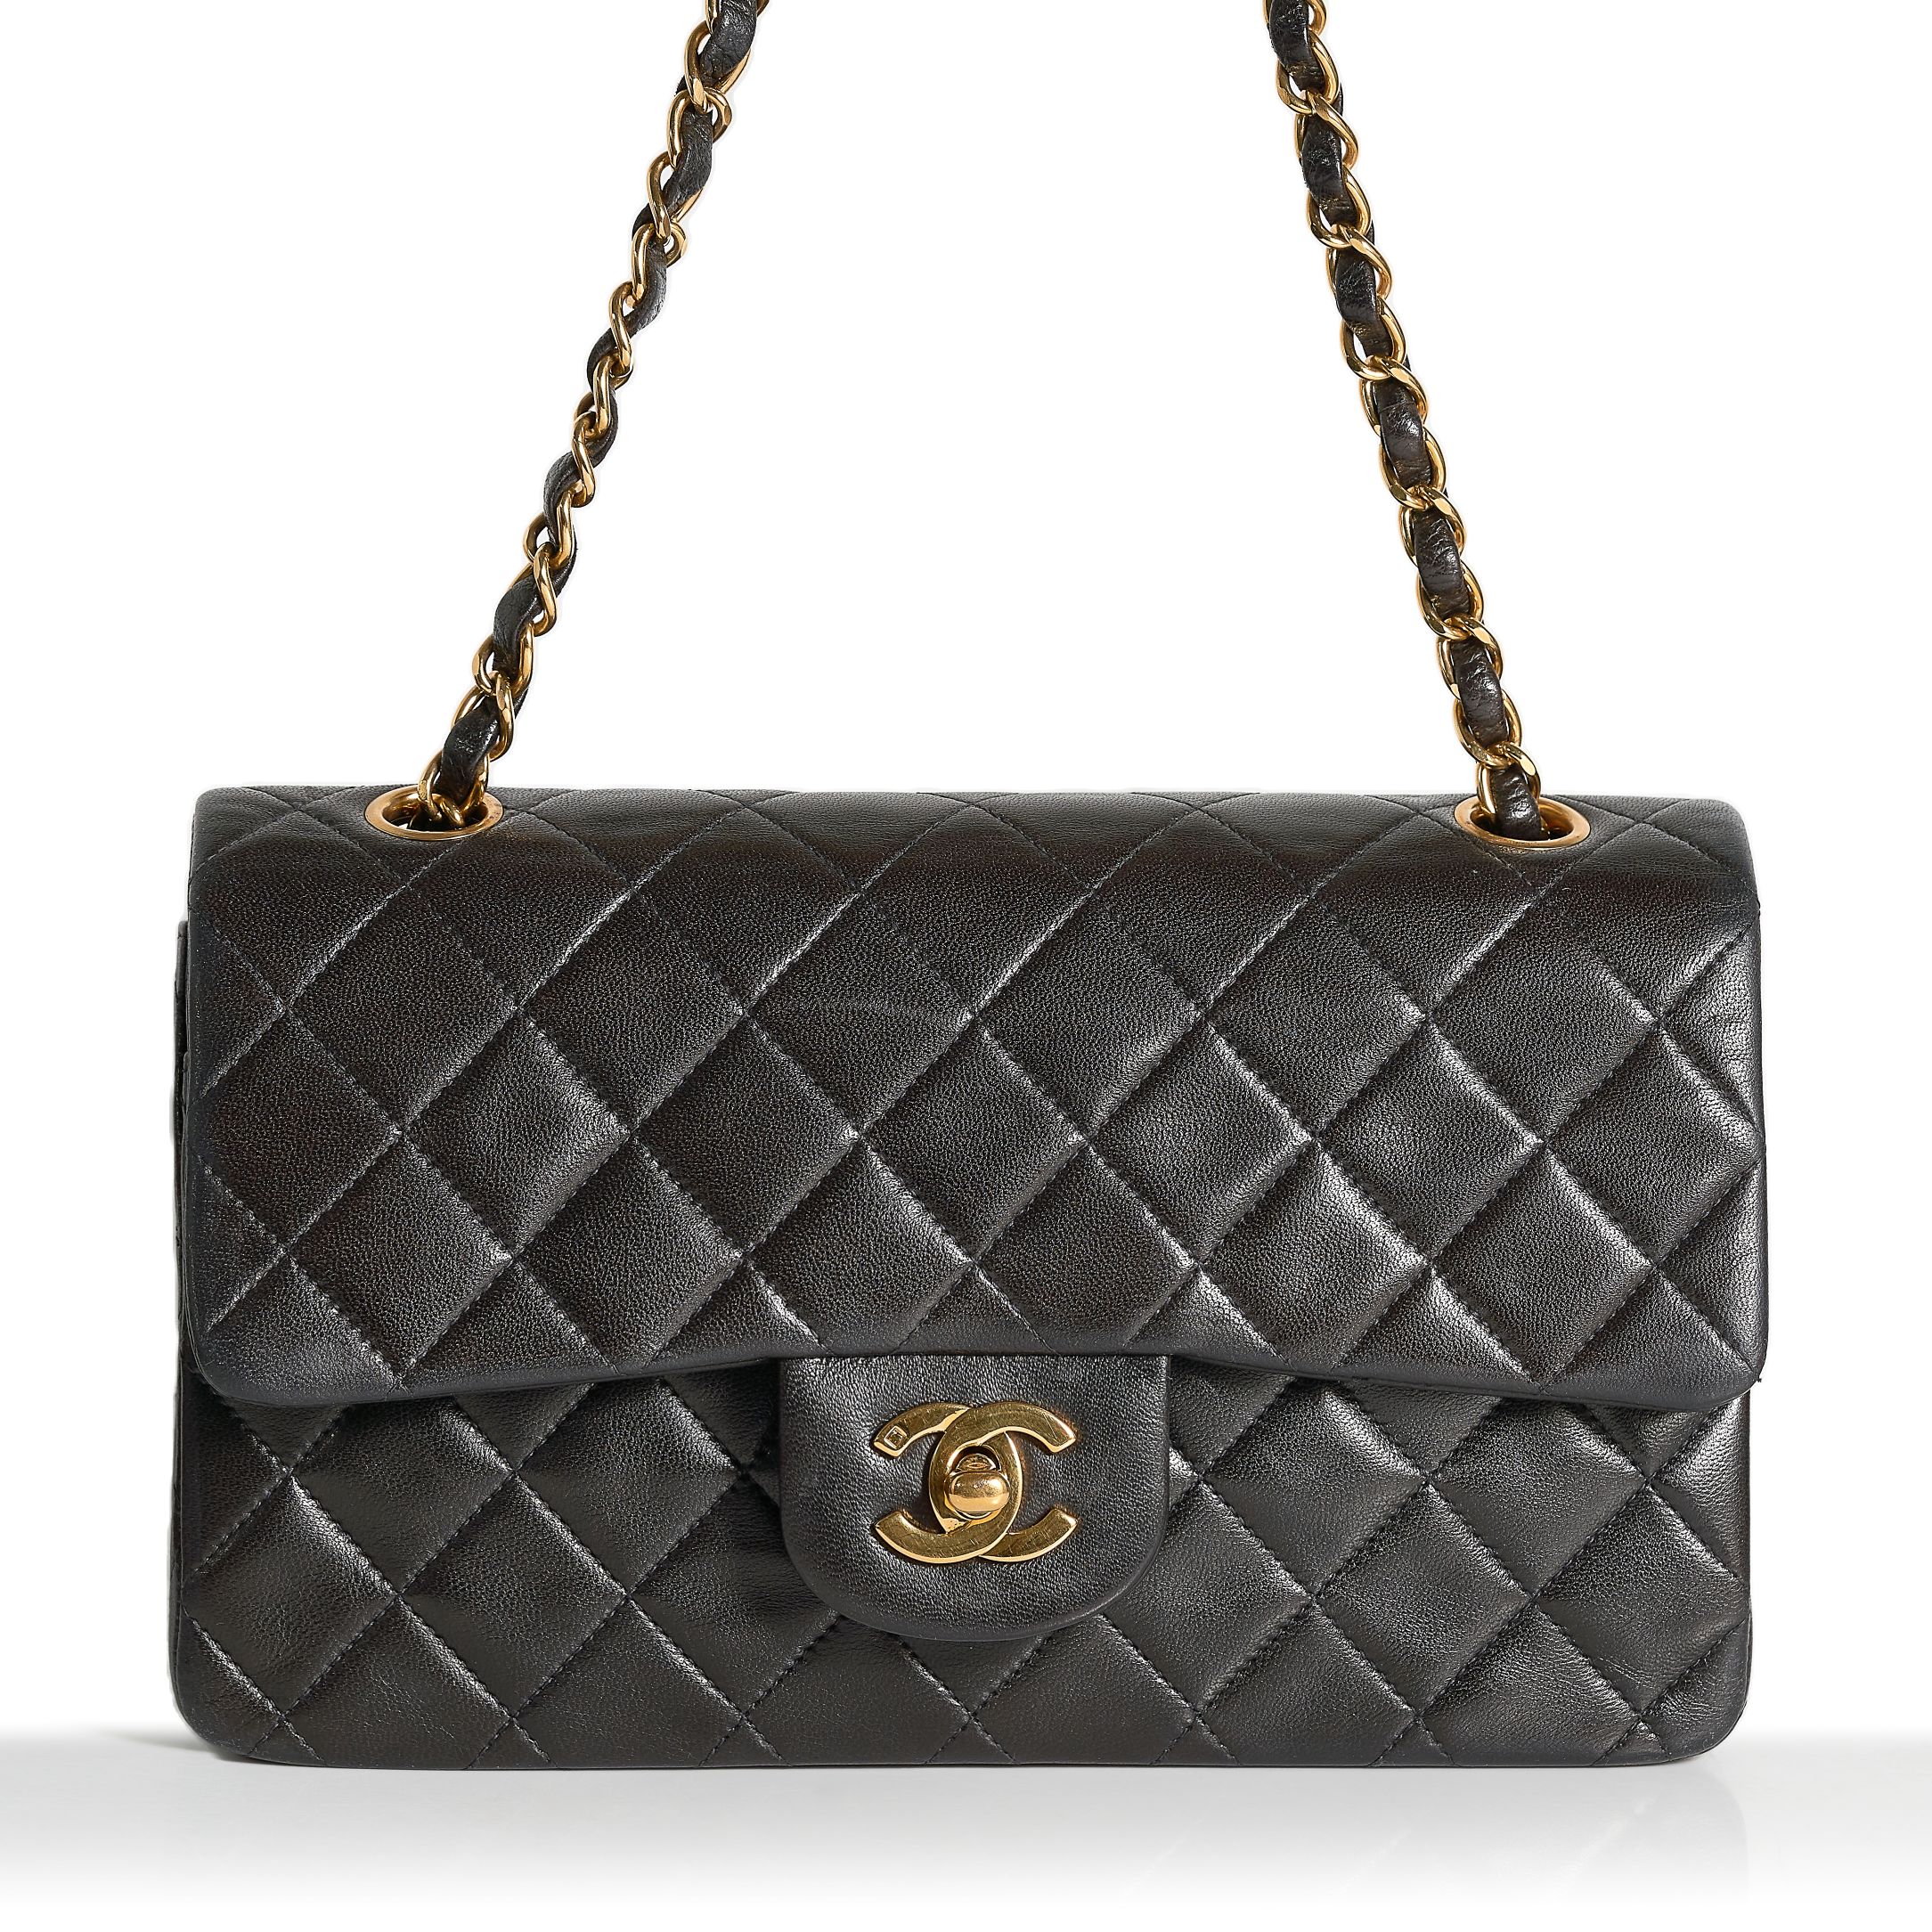 CHANEL, A VINTAGE BLACK QUILTED LAMB LEATHER 9" DOUBLE FLAP BAG quilted lamb leather, gold tone